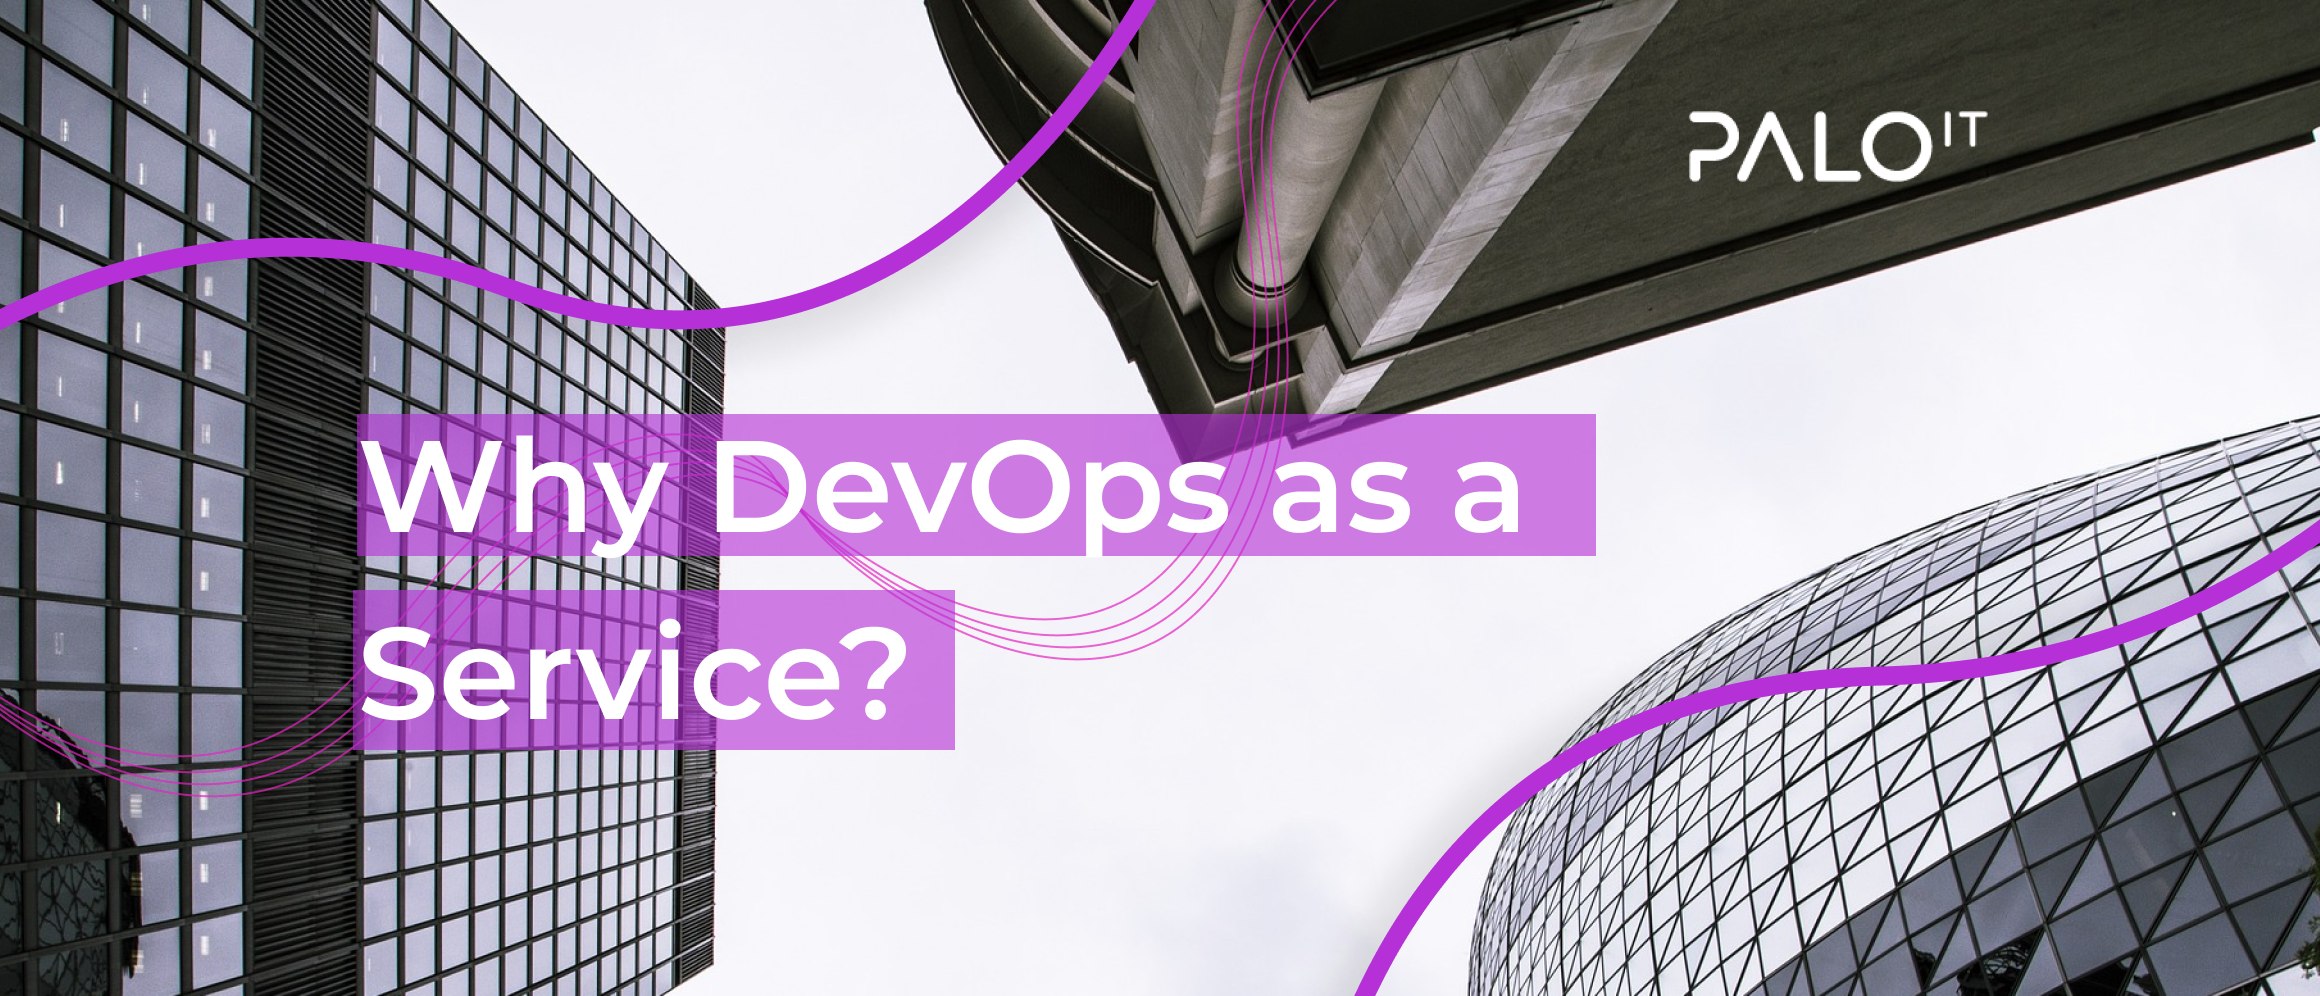 Top 5 reasons why your startup should choose DevOps as a Service